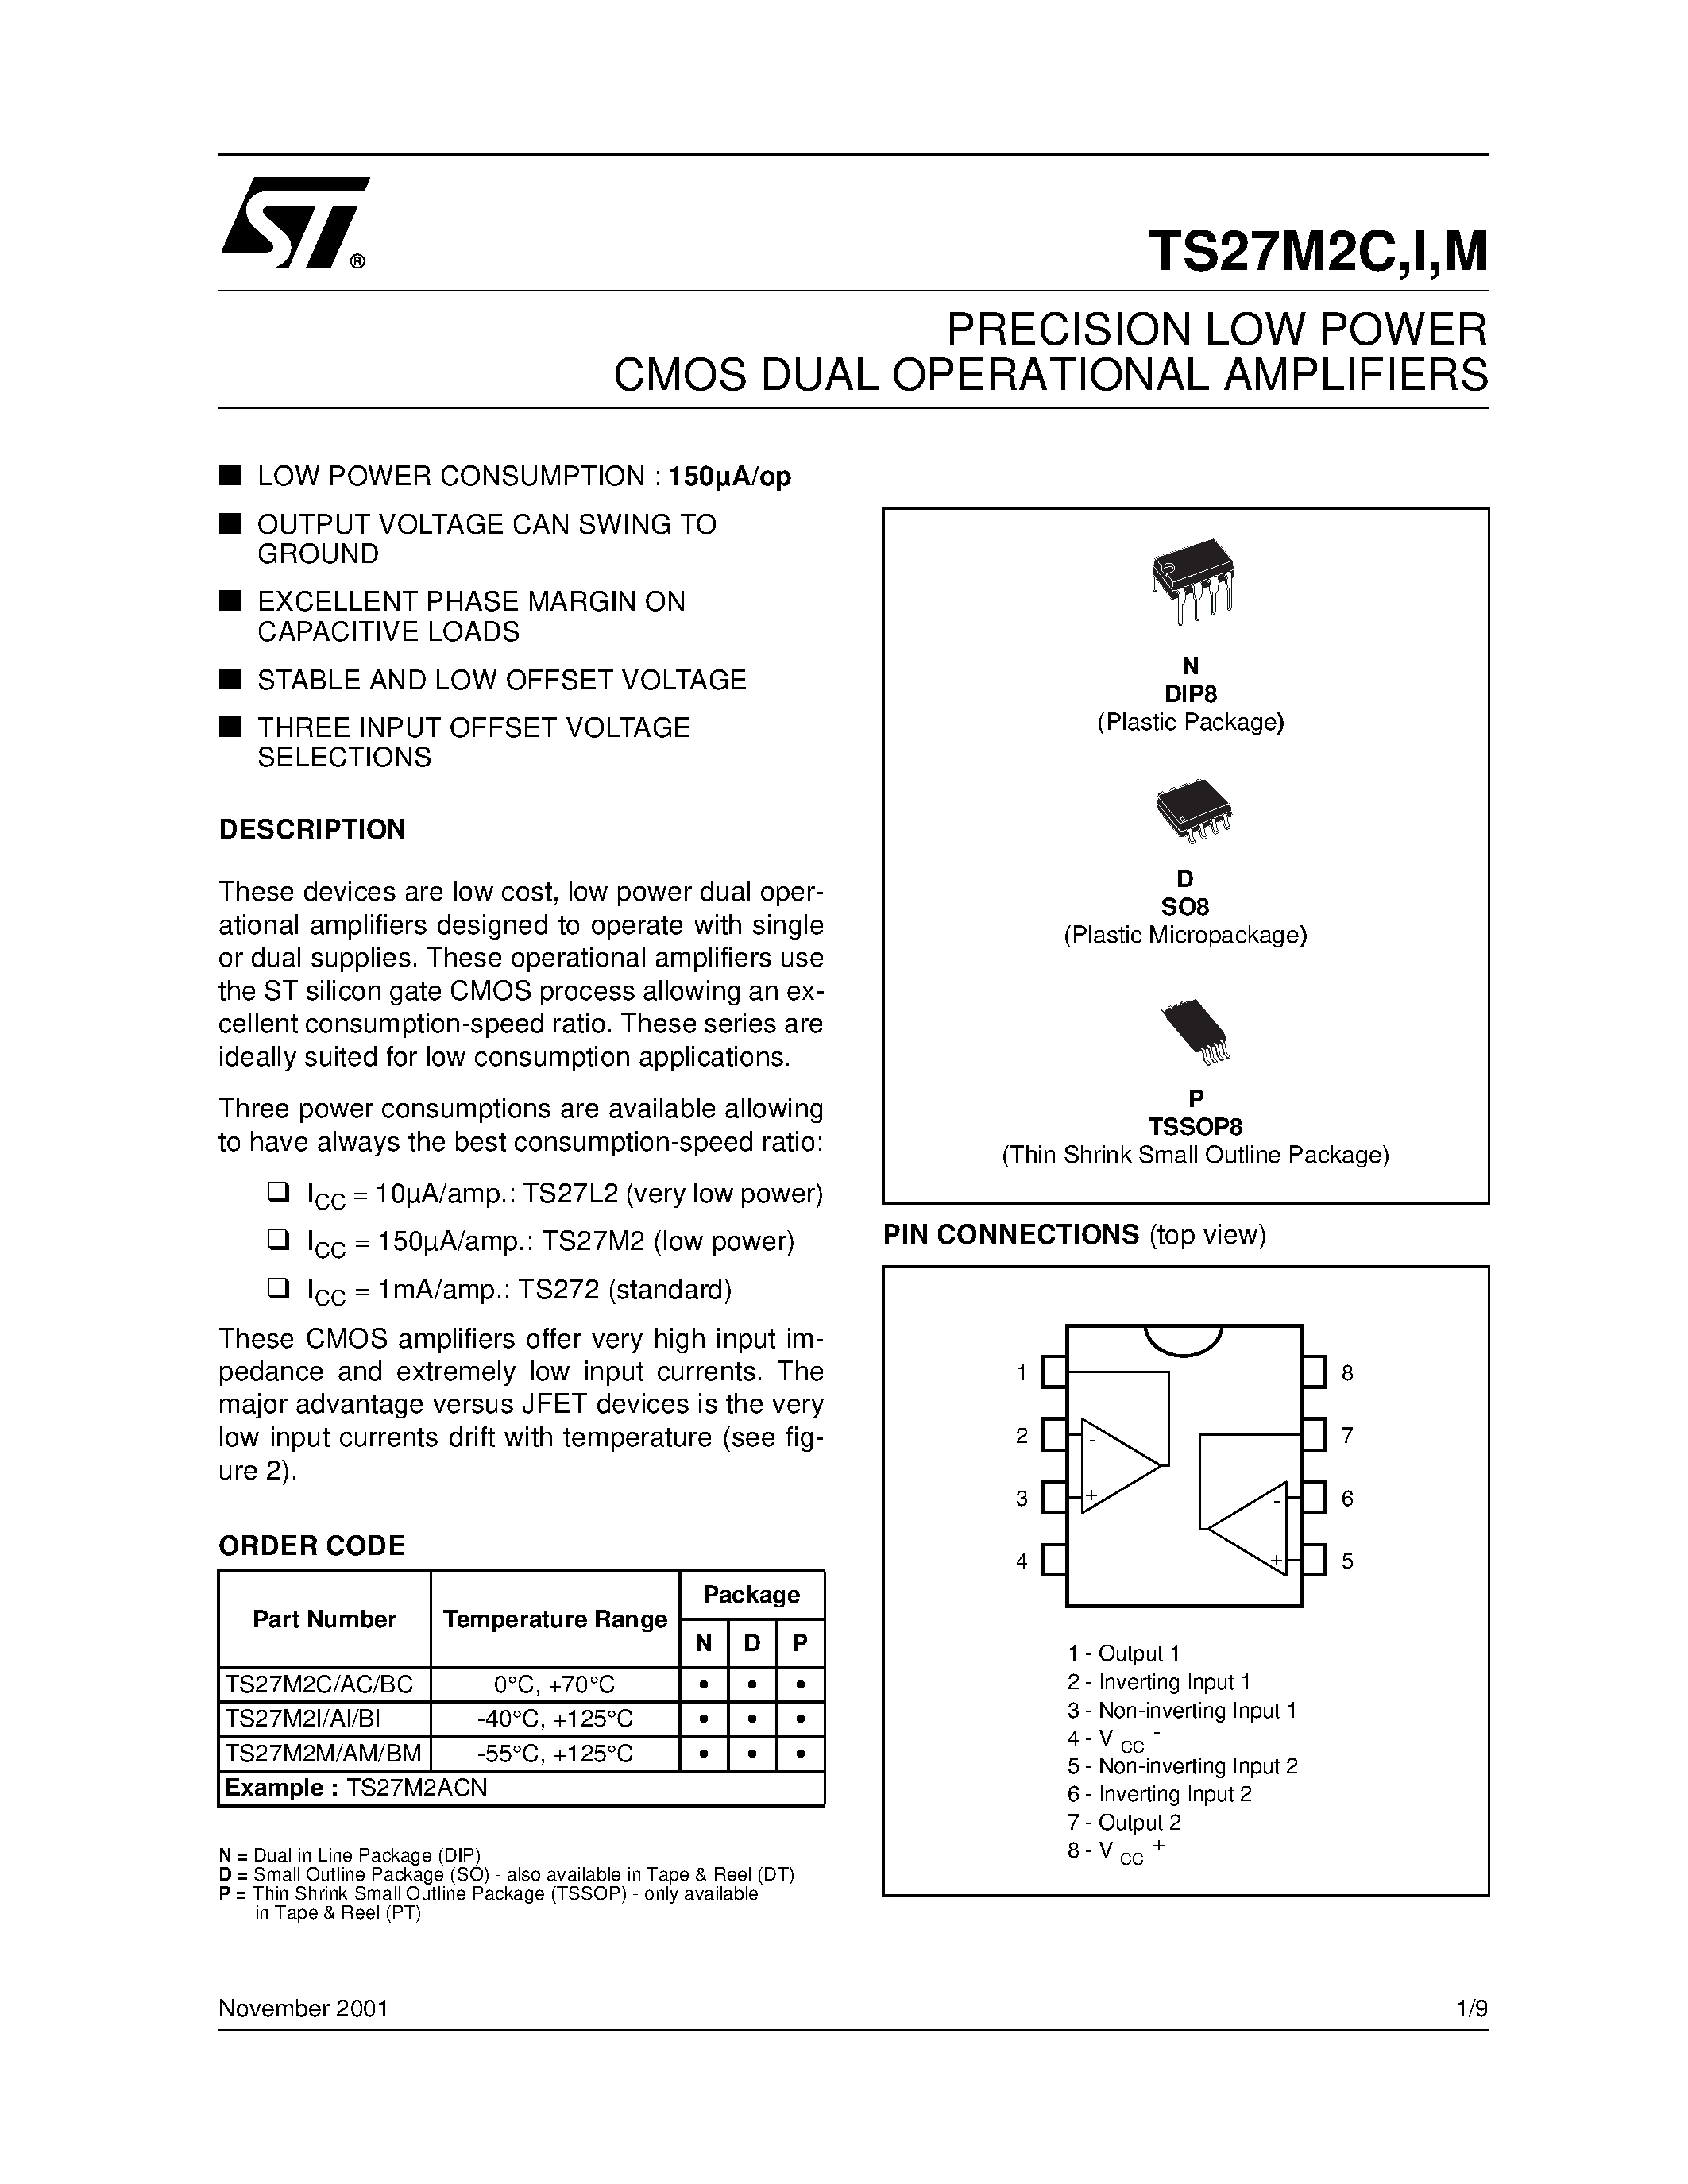 Datasheet TS27M2ACN - PRECISION LOW POWER CMOS DUAL OPERATIONAL AMPLIFIERS page 1